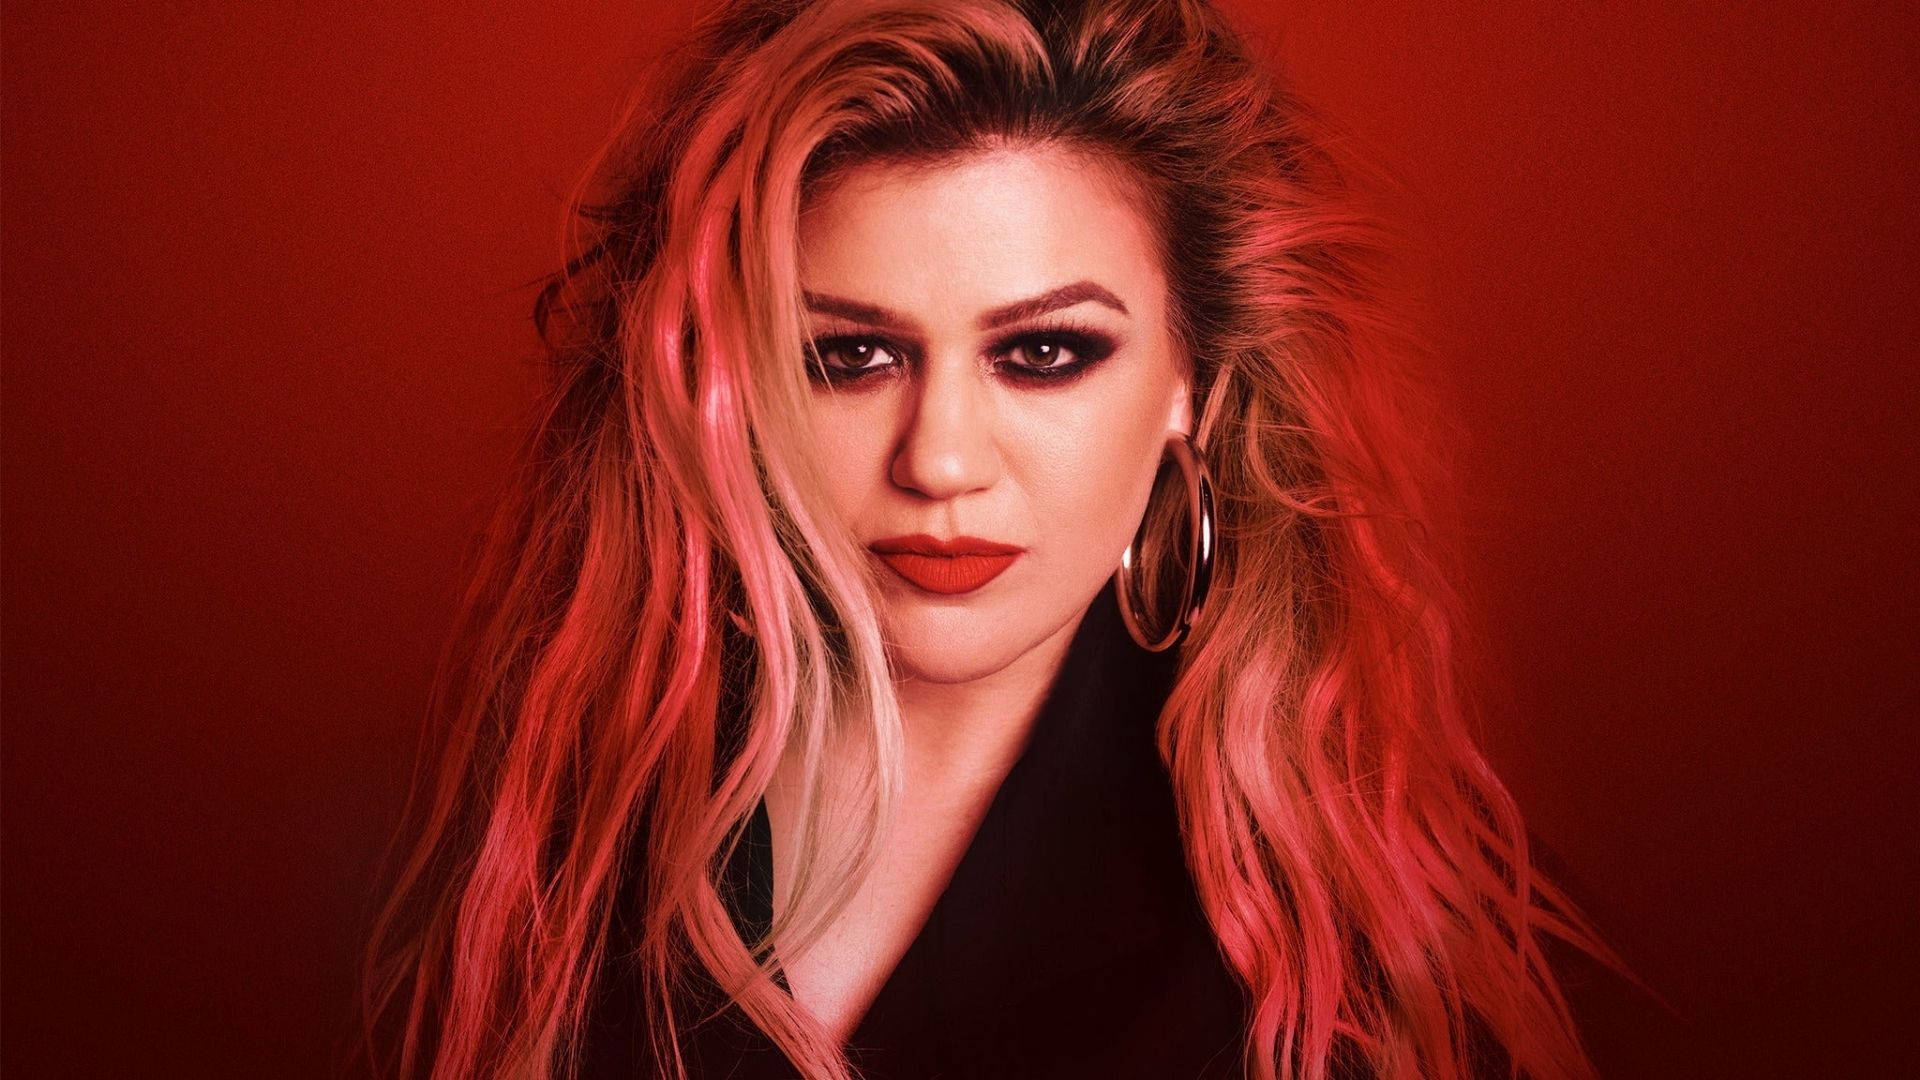 Kelly Clarkson In Hot Red Background